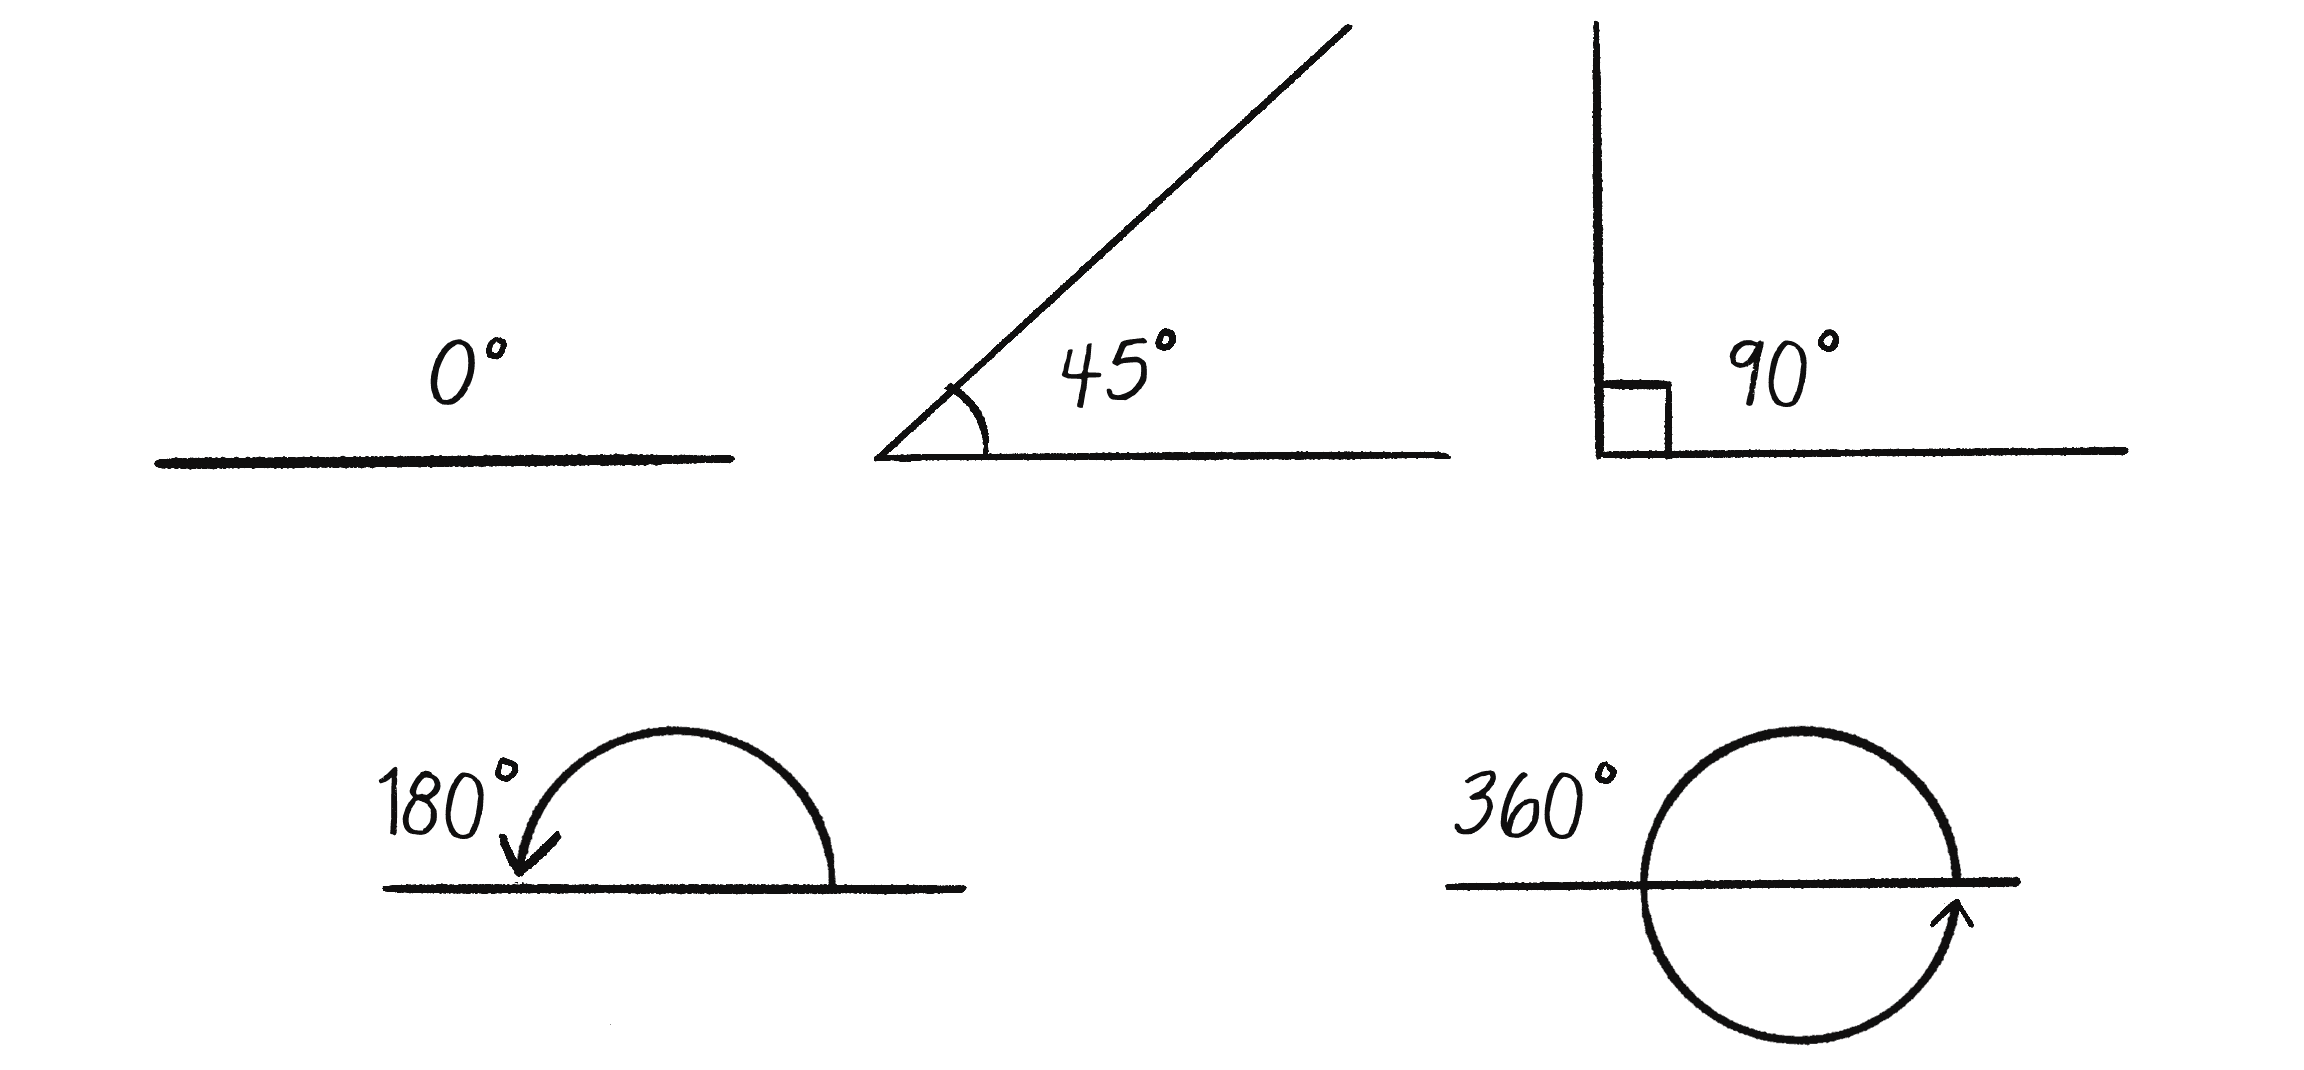 Figure 3.1 Angles measured in degrees